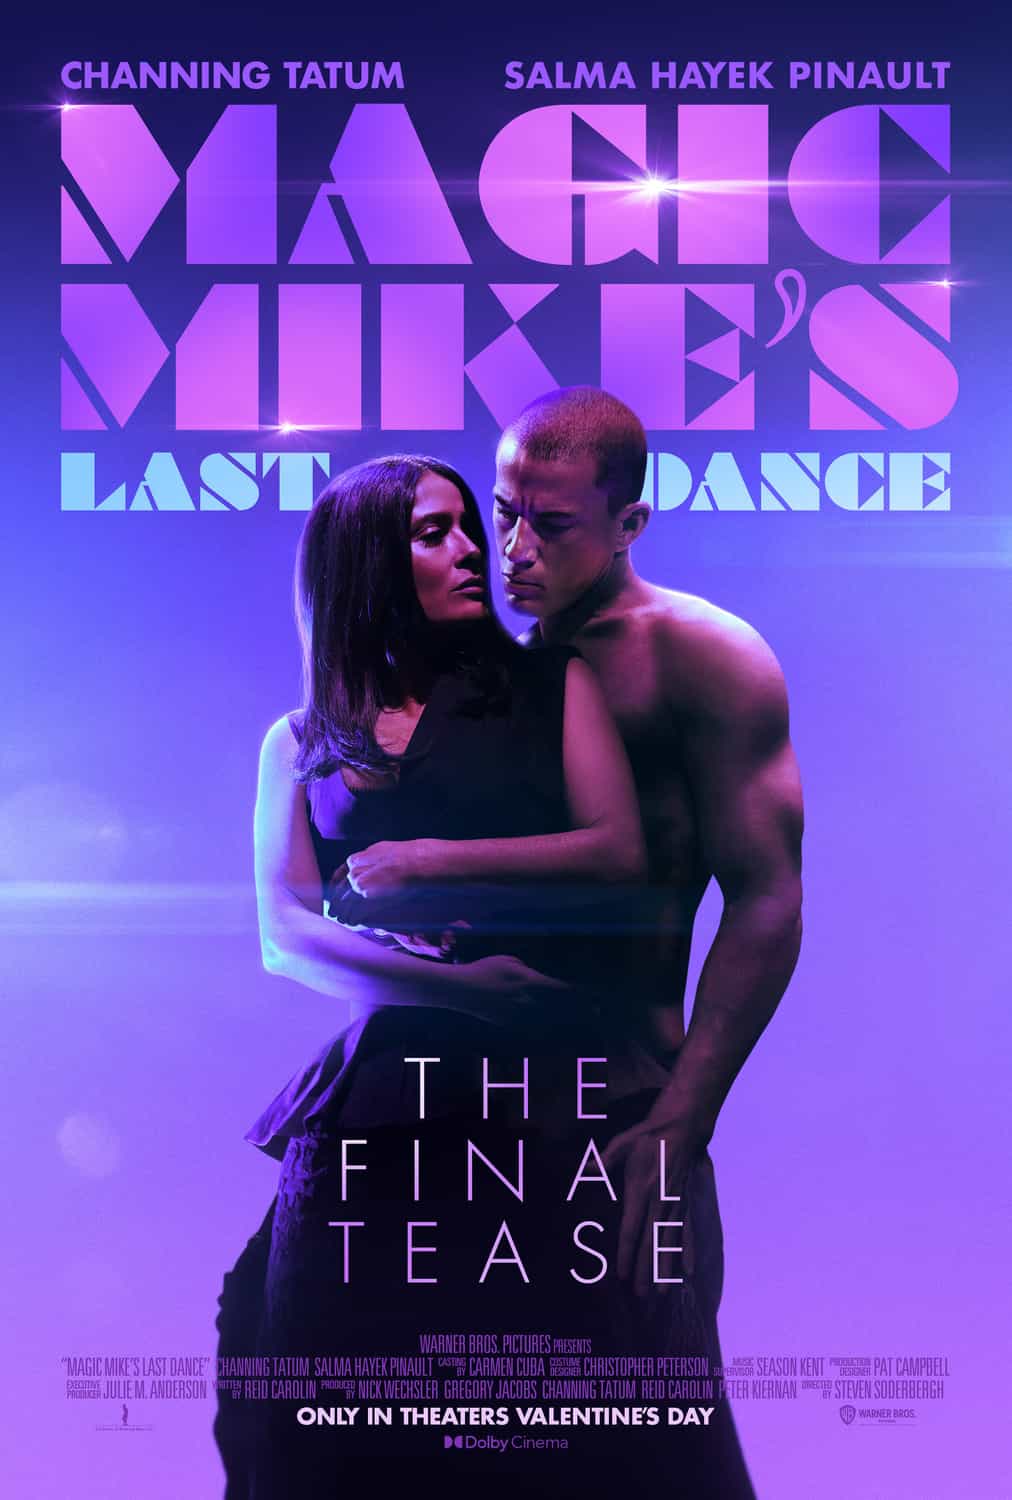 US Box Office Weekend Report 10th - 12th February 2023:  Magic Mikes Last Dance makes its debut at the top of the US box office over the quiet SuperBowl weekend